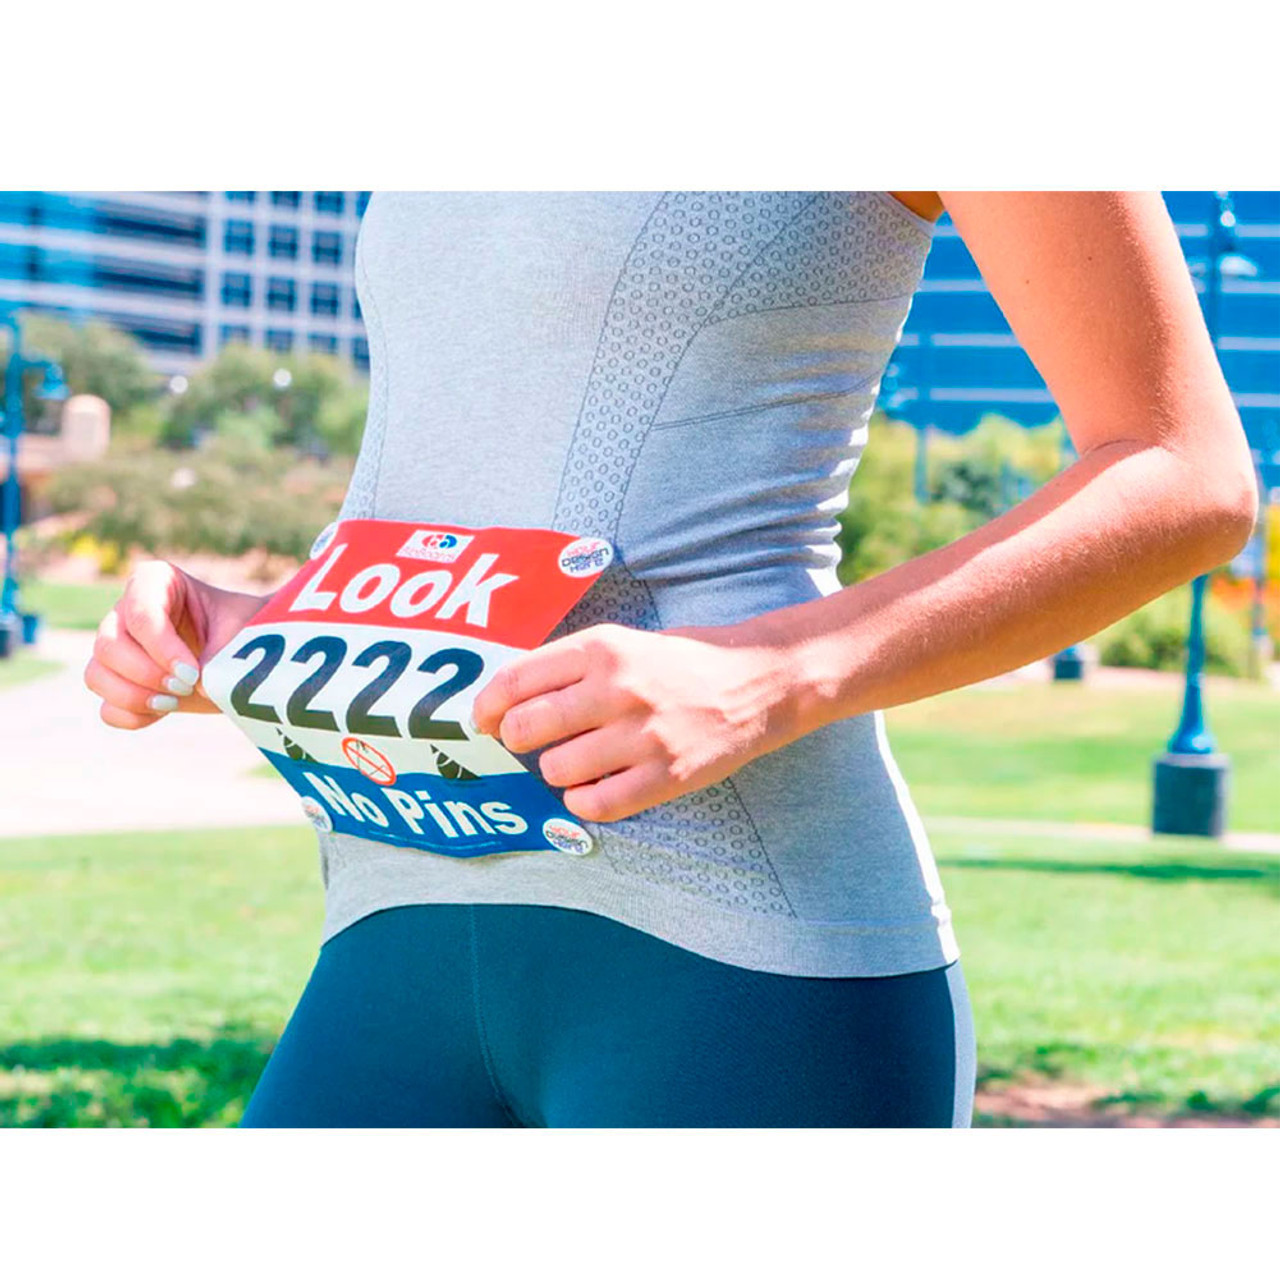 BibBoards Race Bib Fasteners Review- Hamden CT: SPARK Physical Therapy  (2019) 